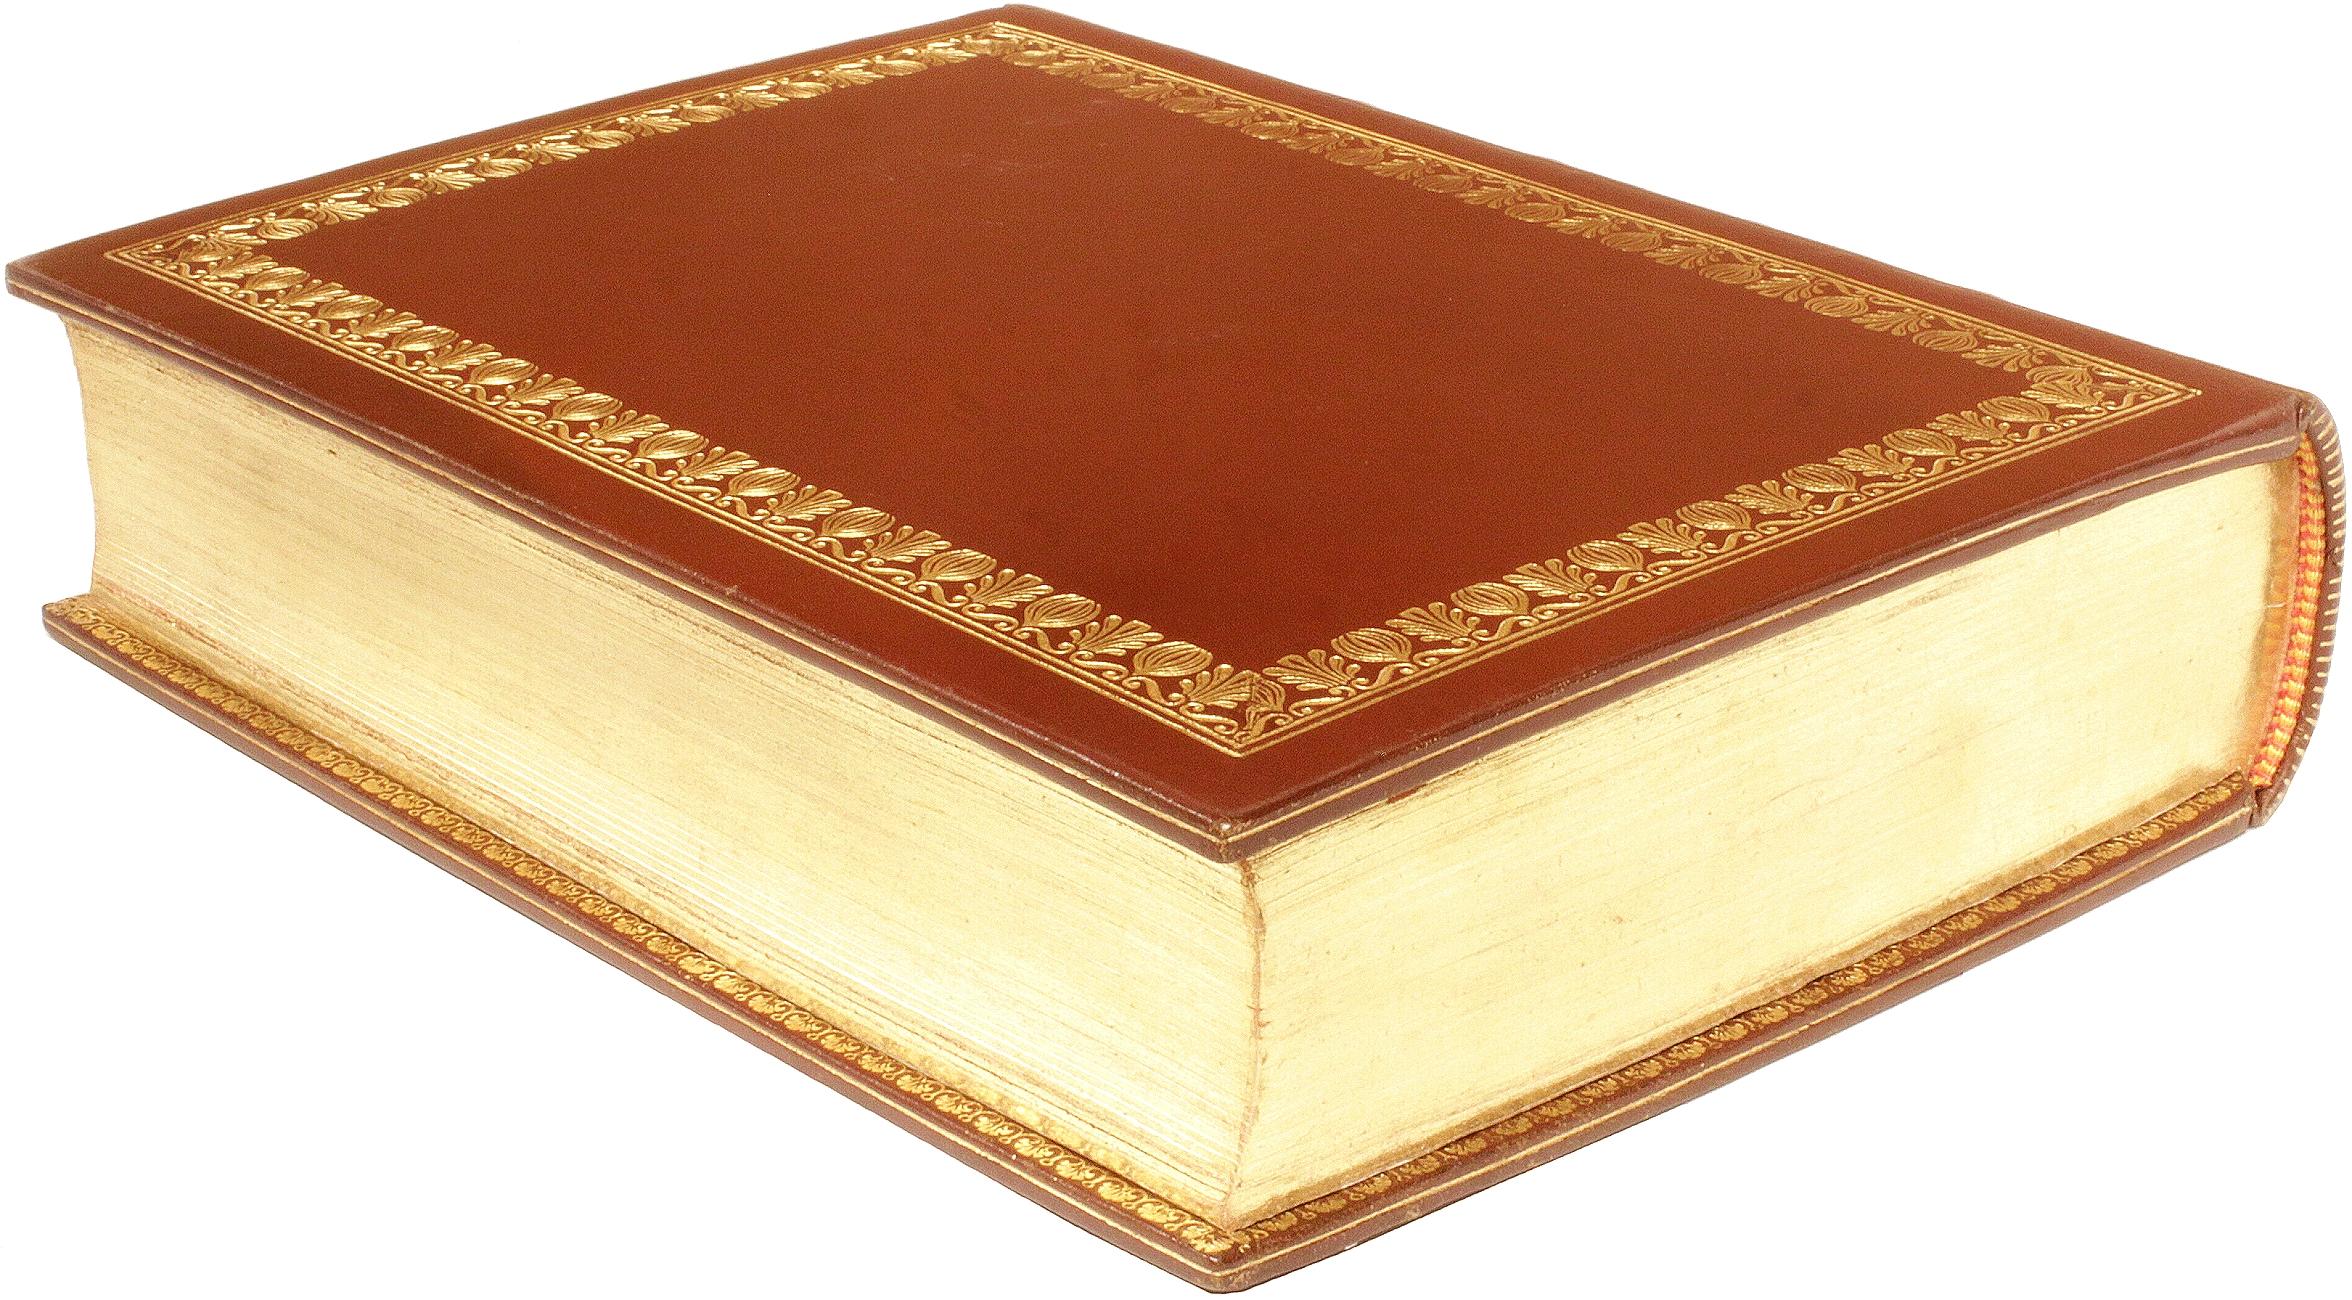 British The Complete Works Of William Shakespeare. IN A FINE FULL LEATHER BINDING